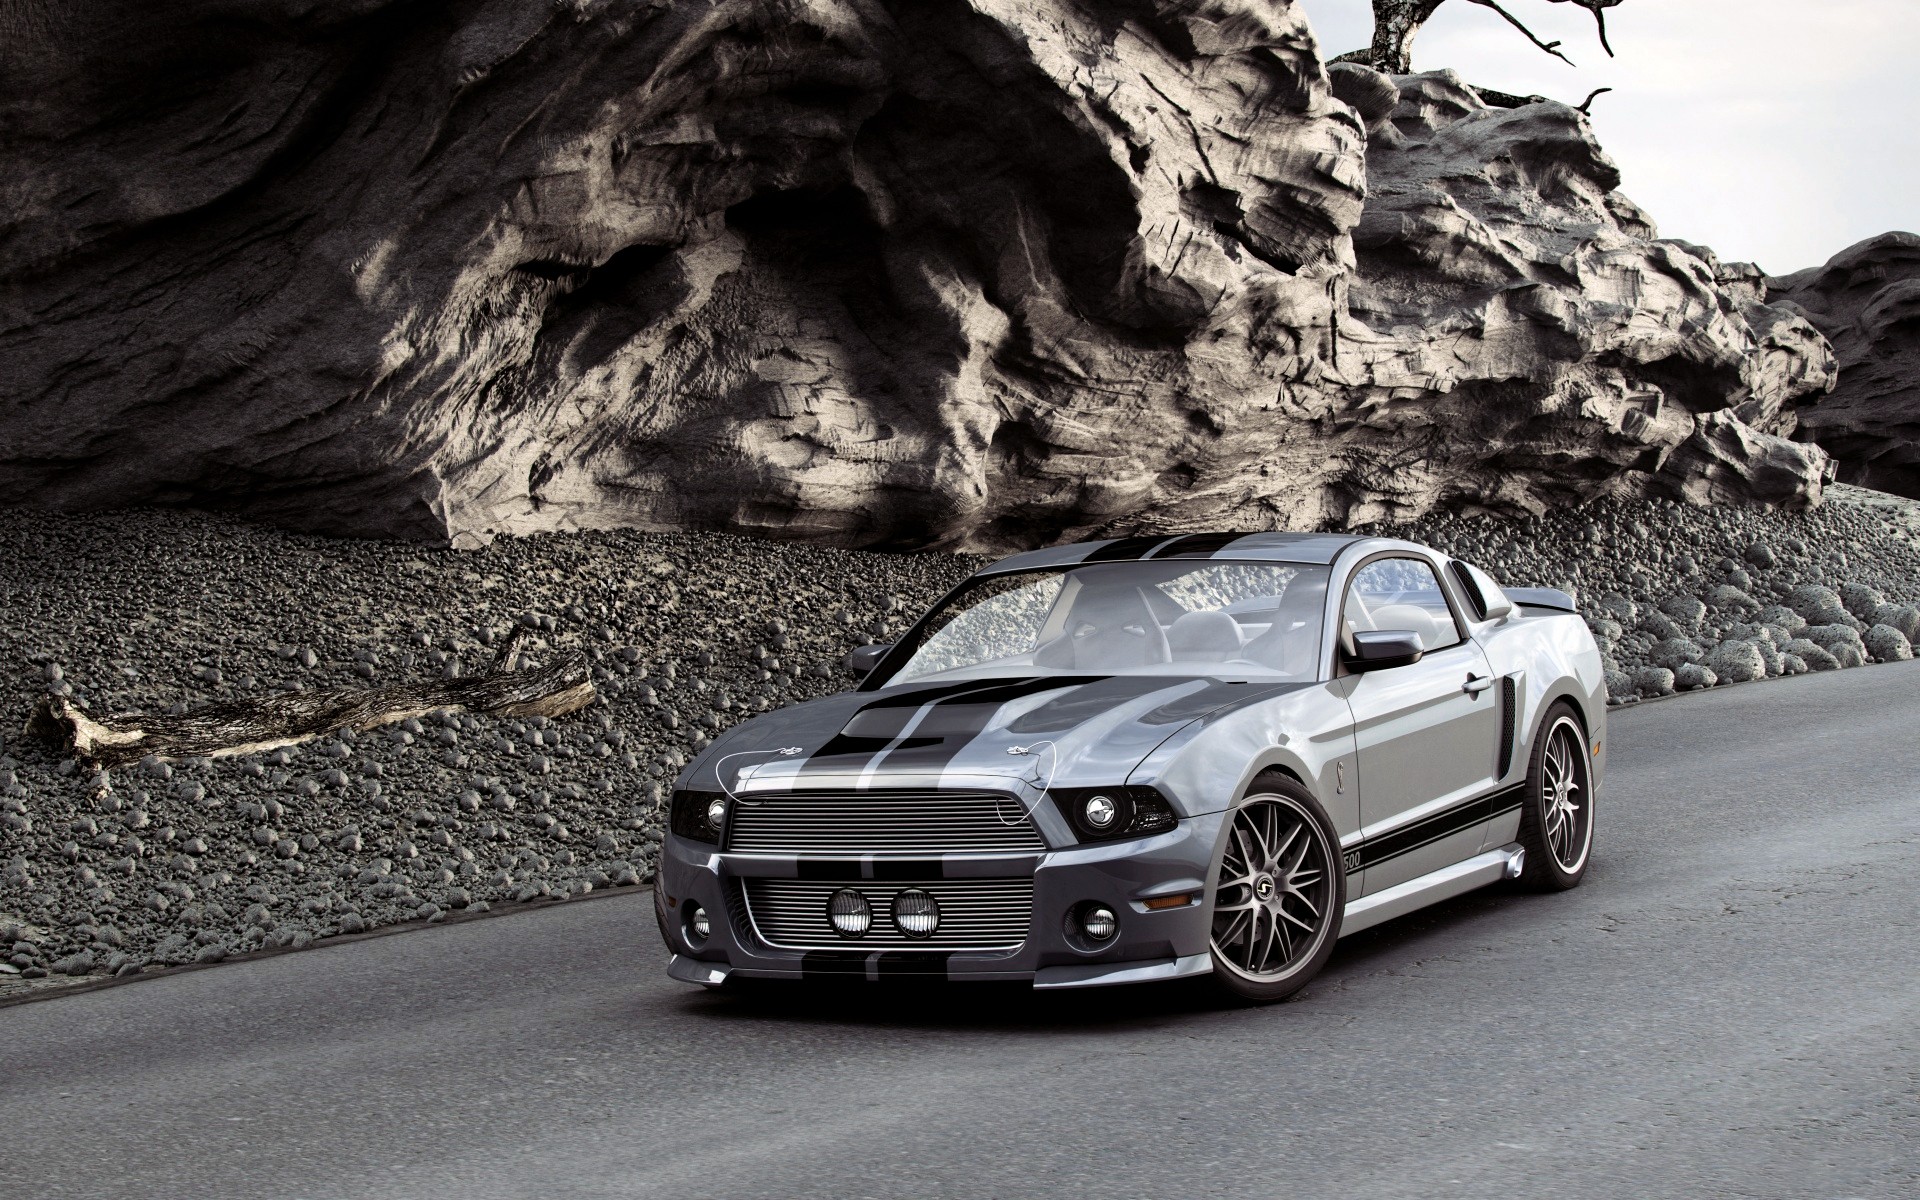 cars, Rocks, Muscle, Cars, Roads, Vehicles, Supercars, Tuning, Ford, Mustang, Shelby, Mustang, Ford, Shelby, Ford, Mustang, Shelby, Gt500 Wallpaper